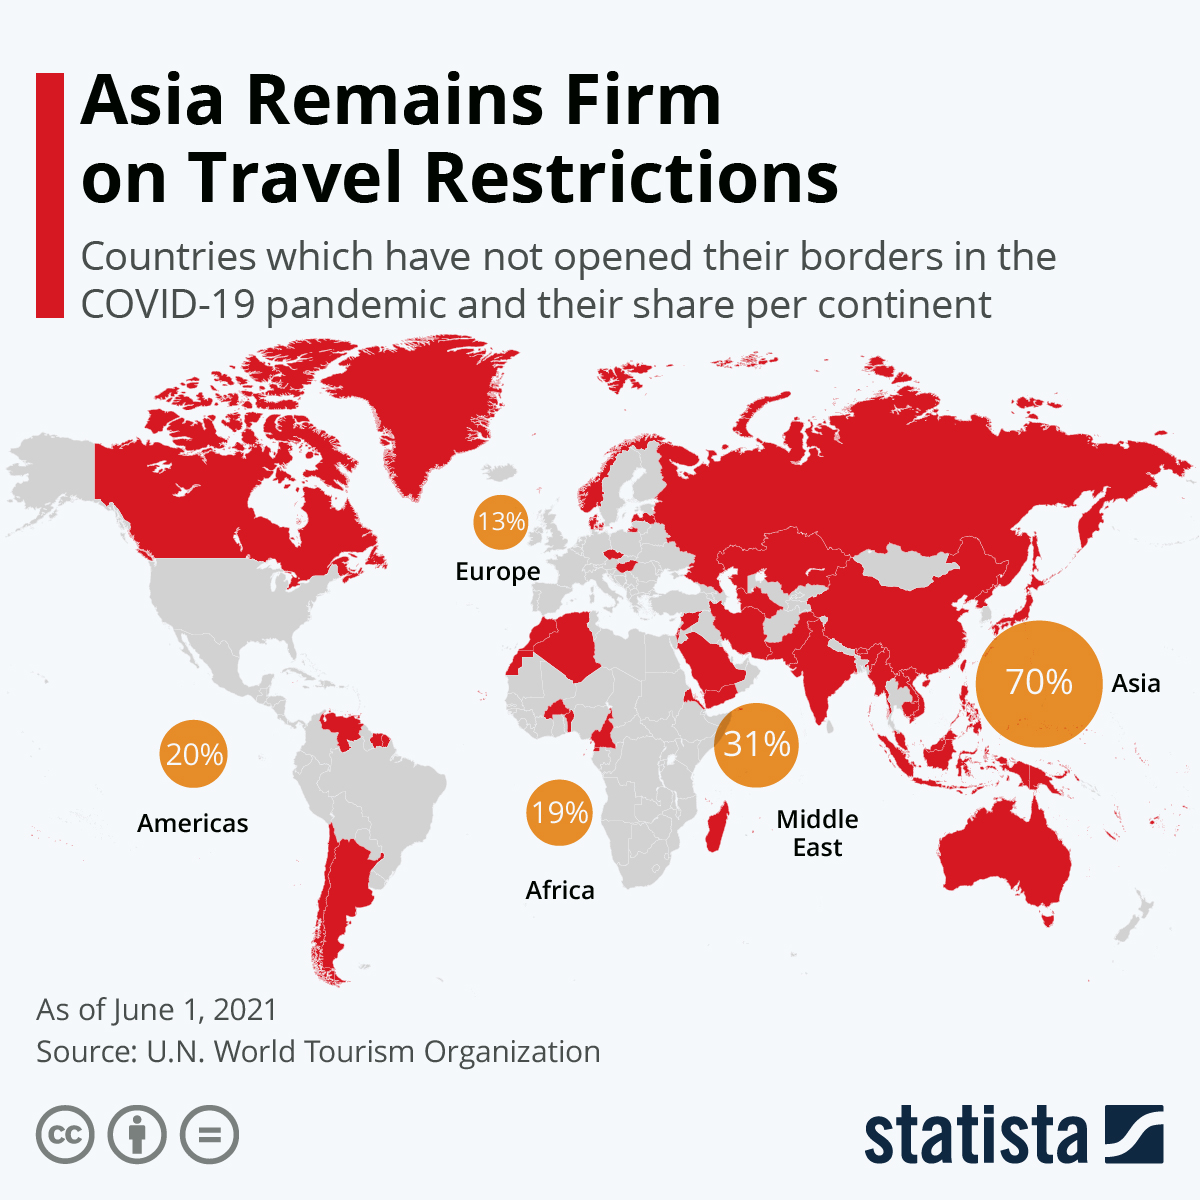 Asia Remains Firm on Travel Restrictions